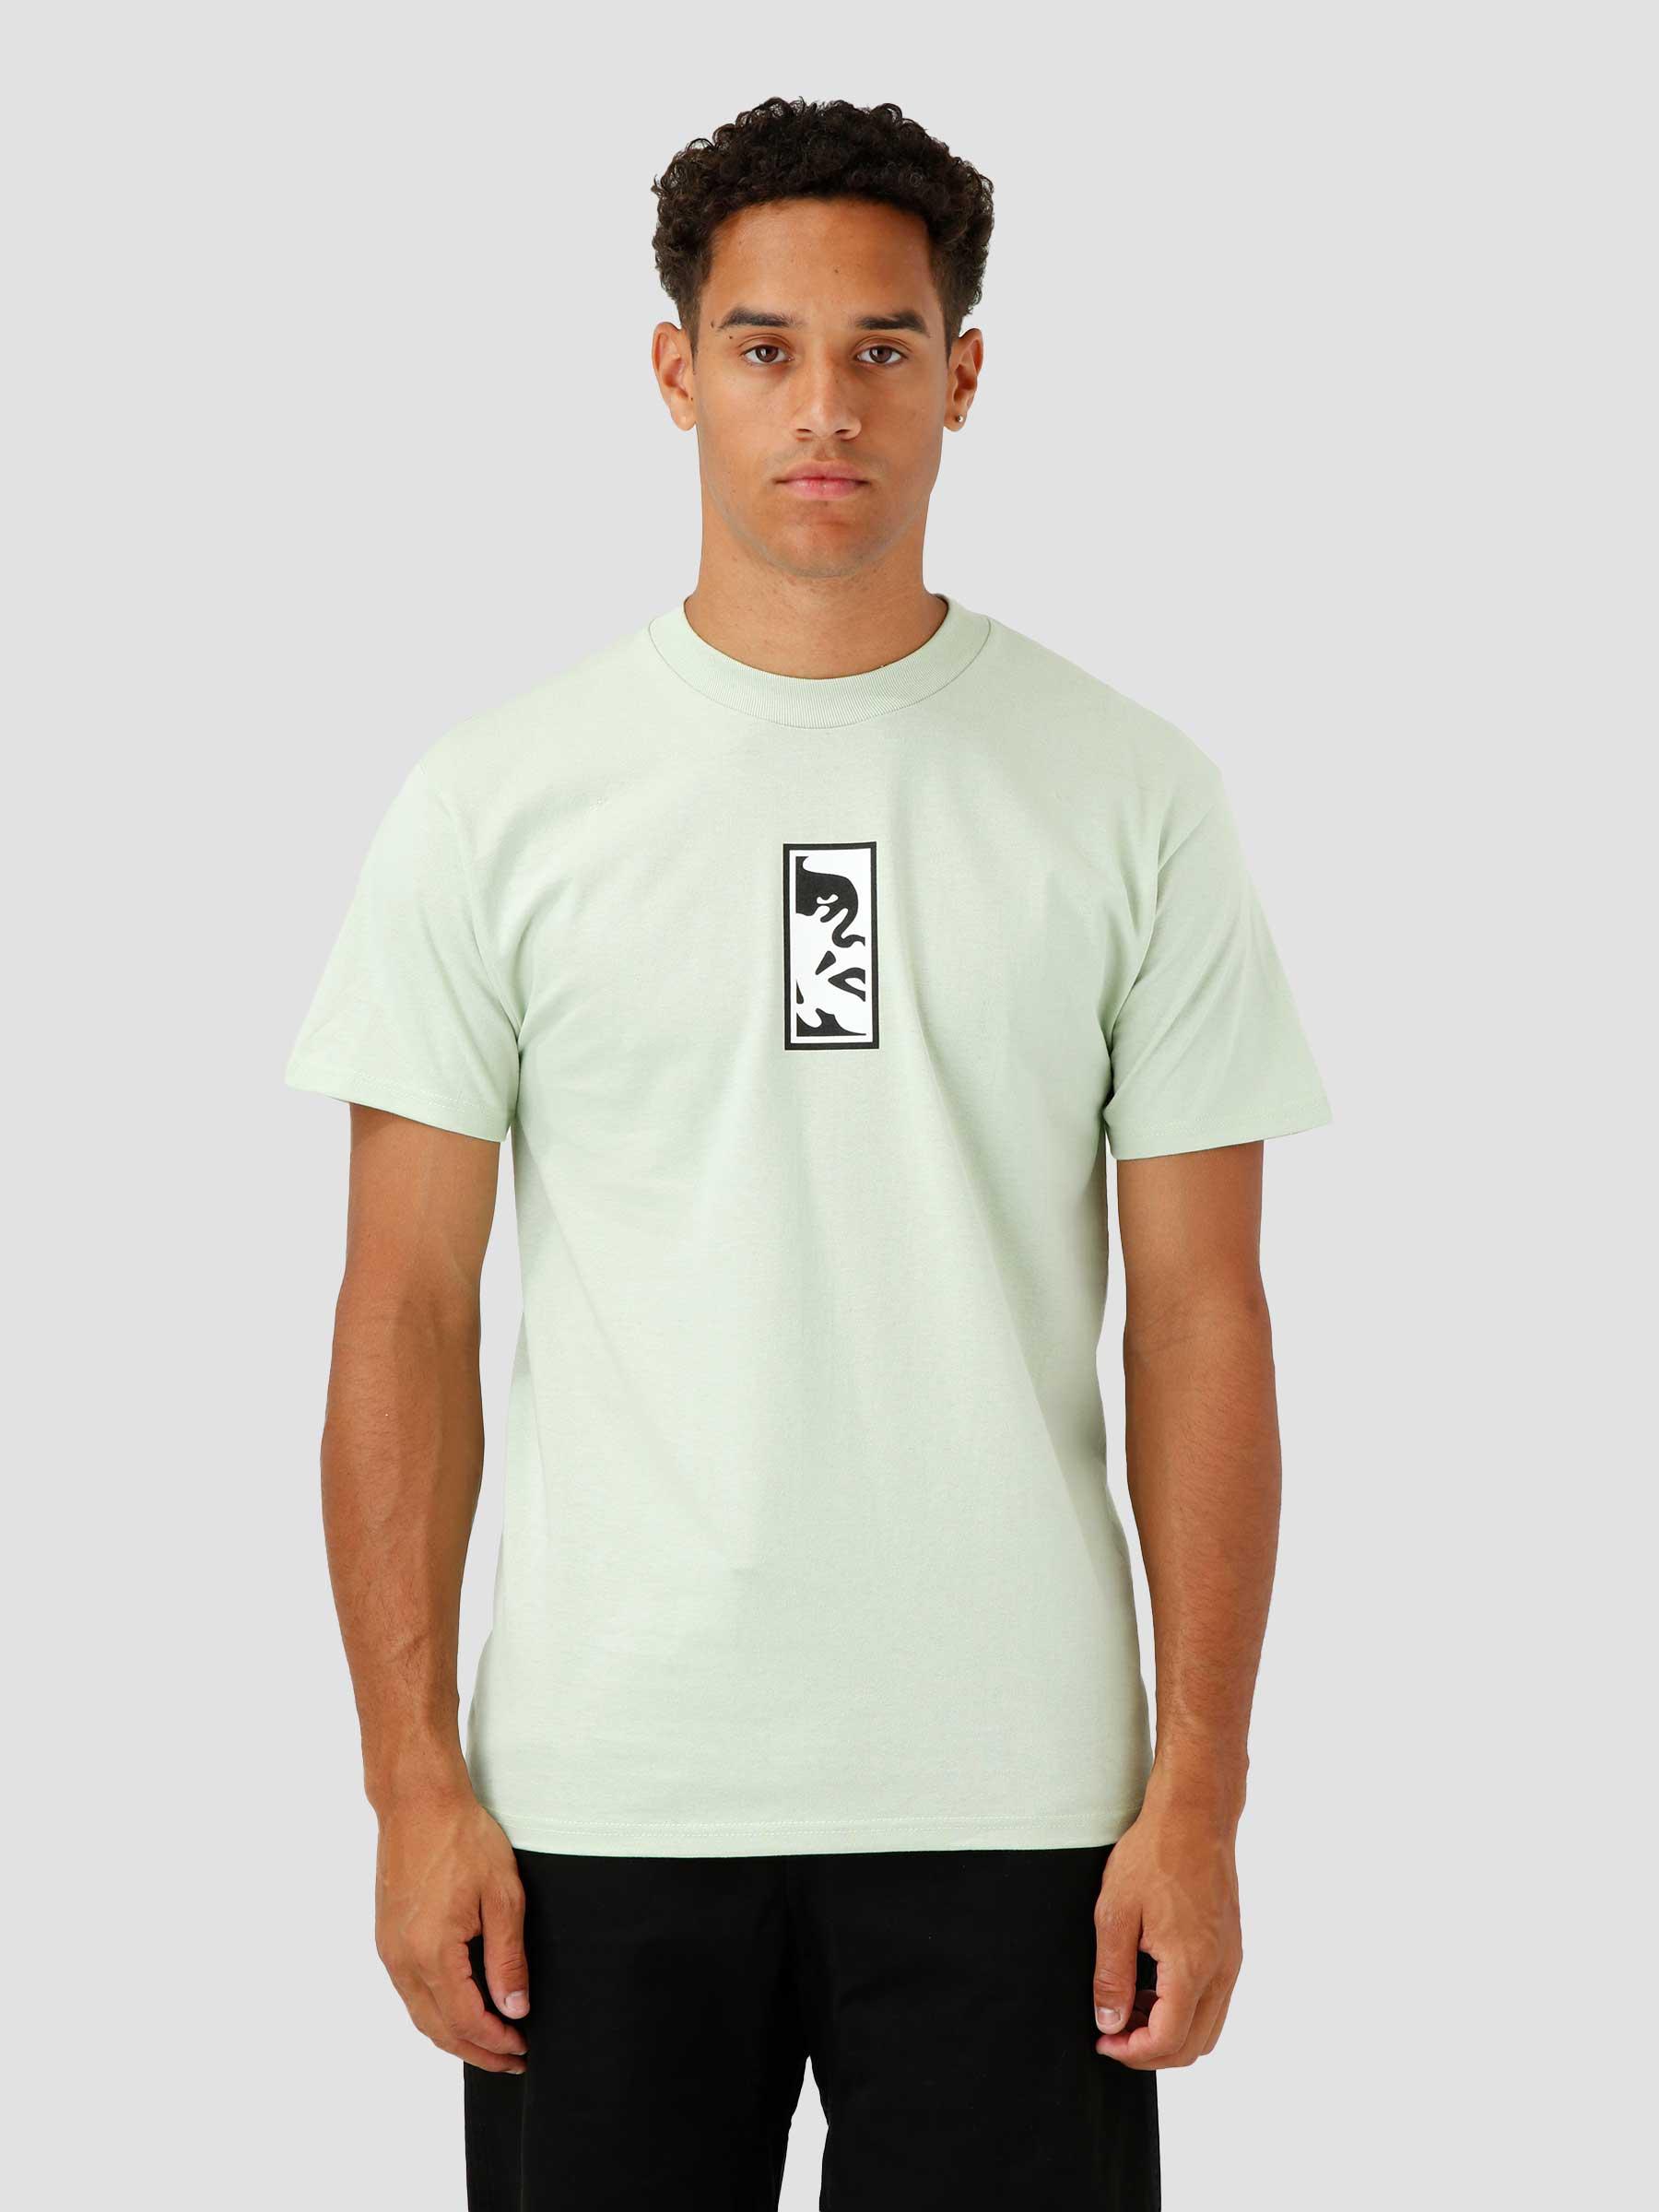 Obey Power & Equality T-shirt Cucumber 165263172